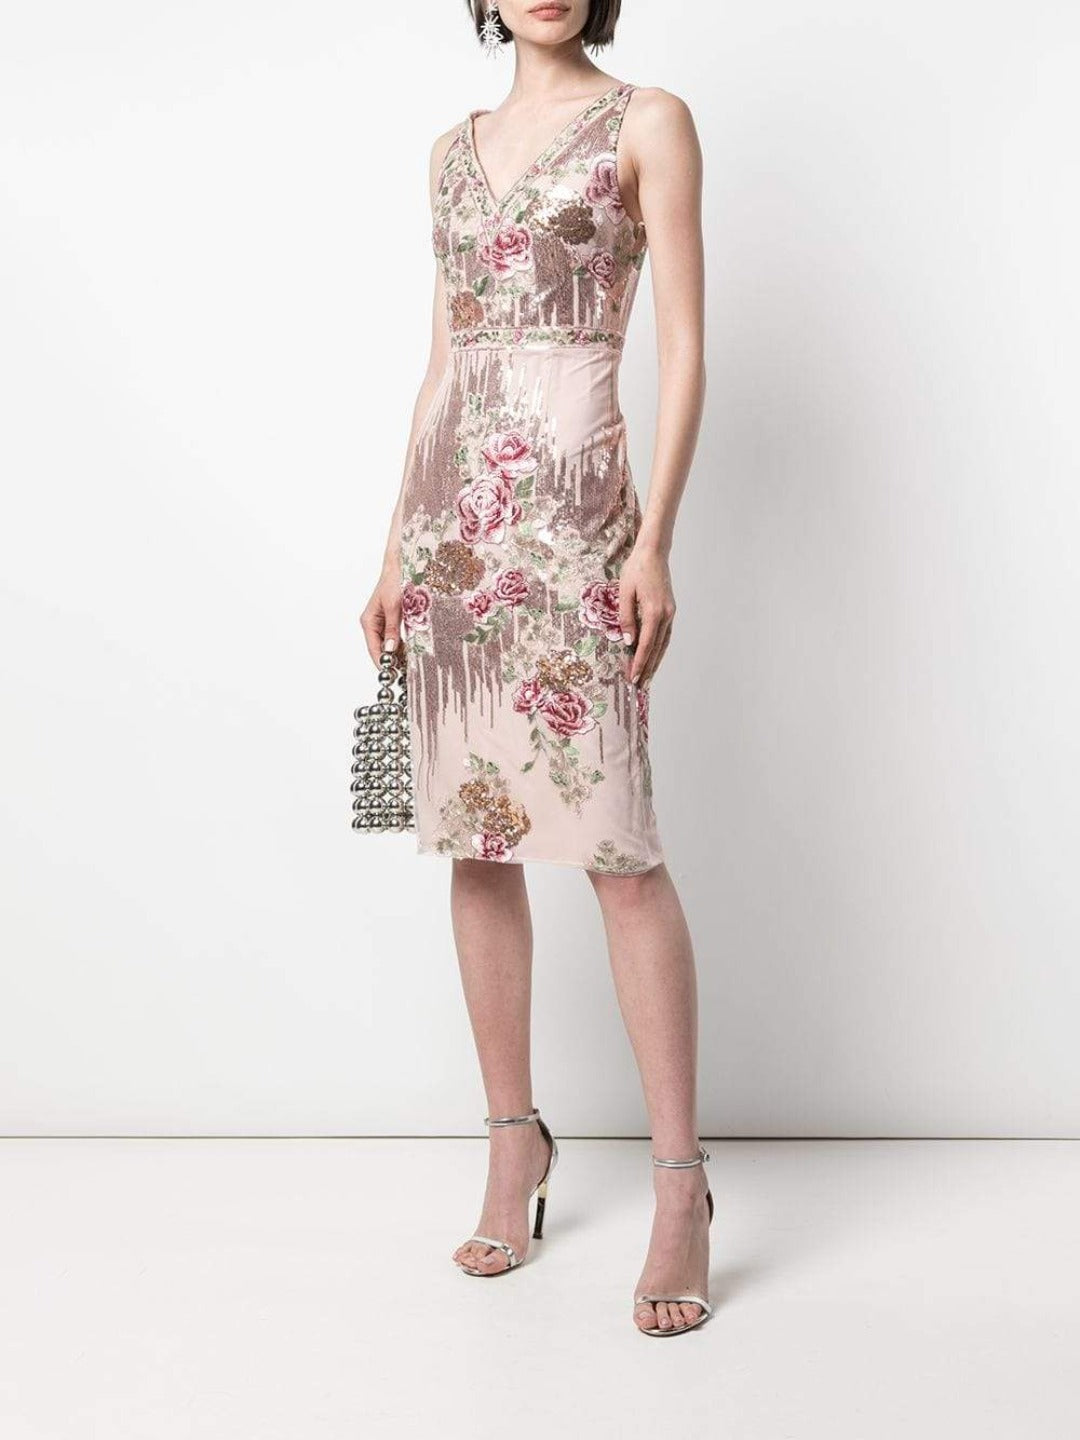 sequin embroidered dress